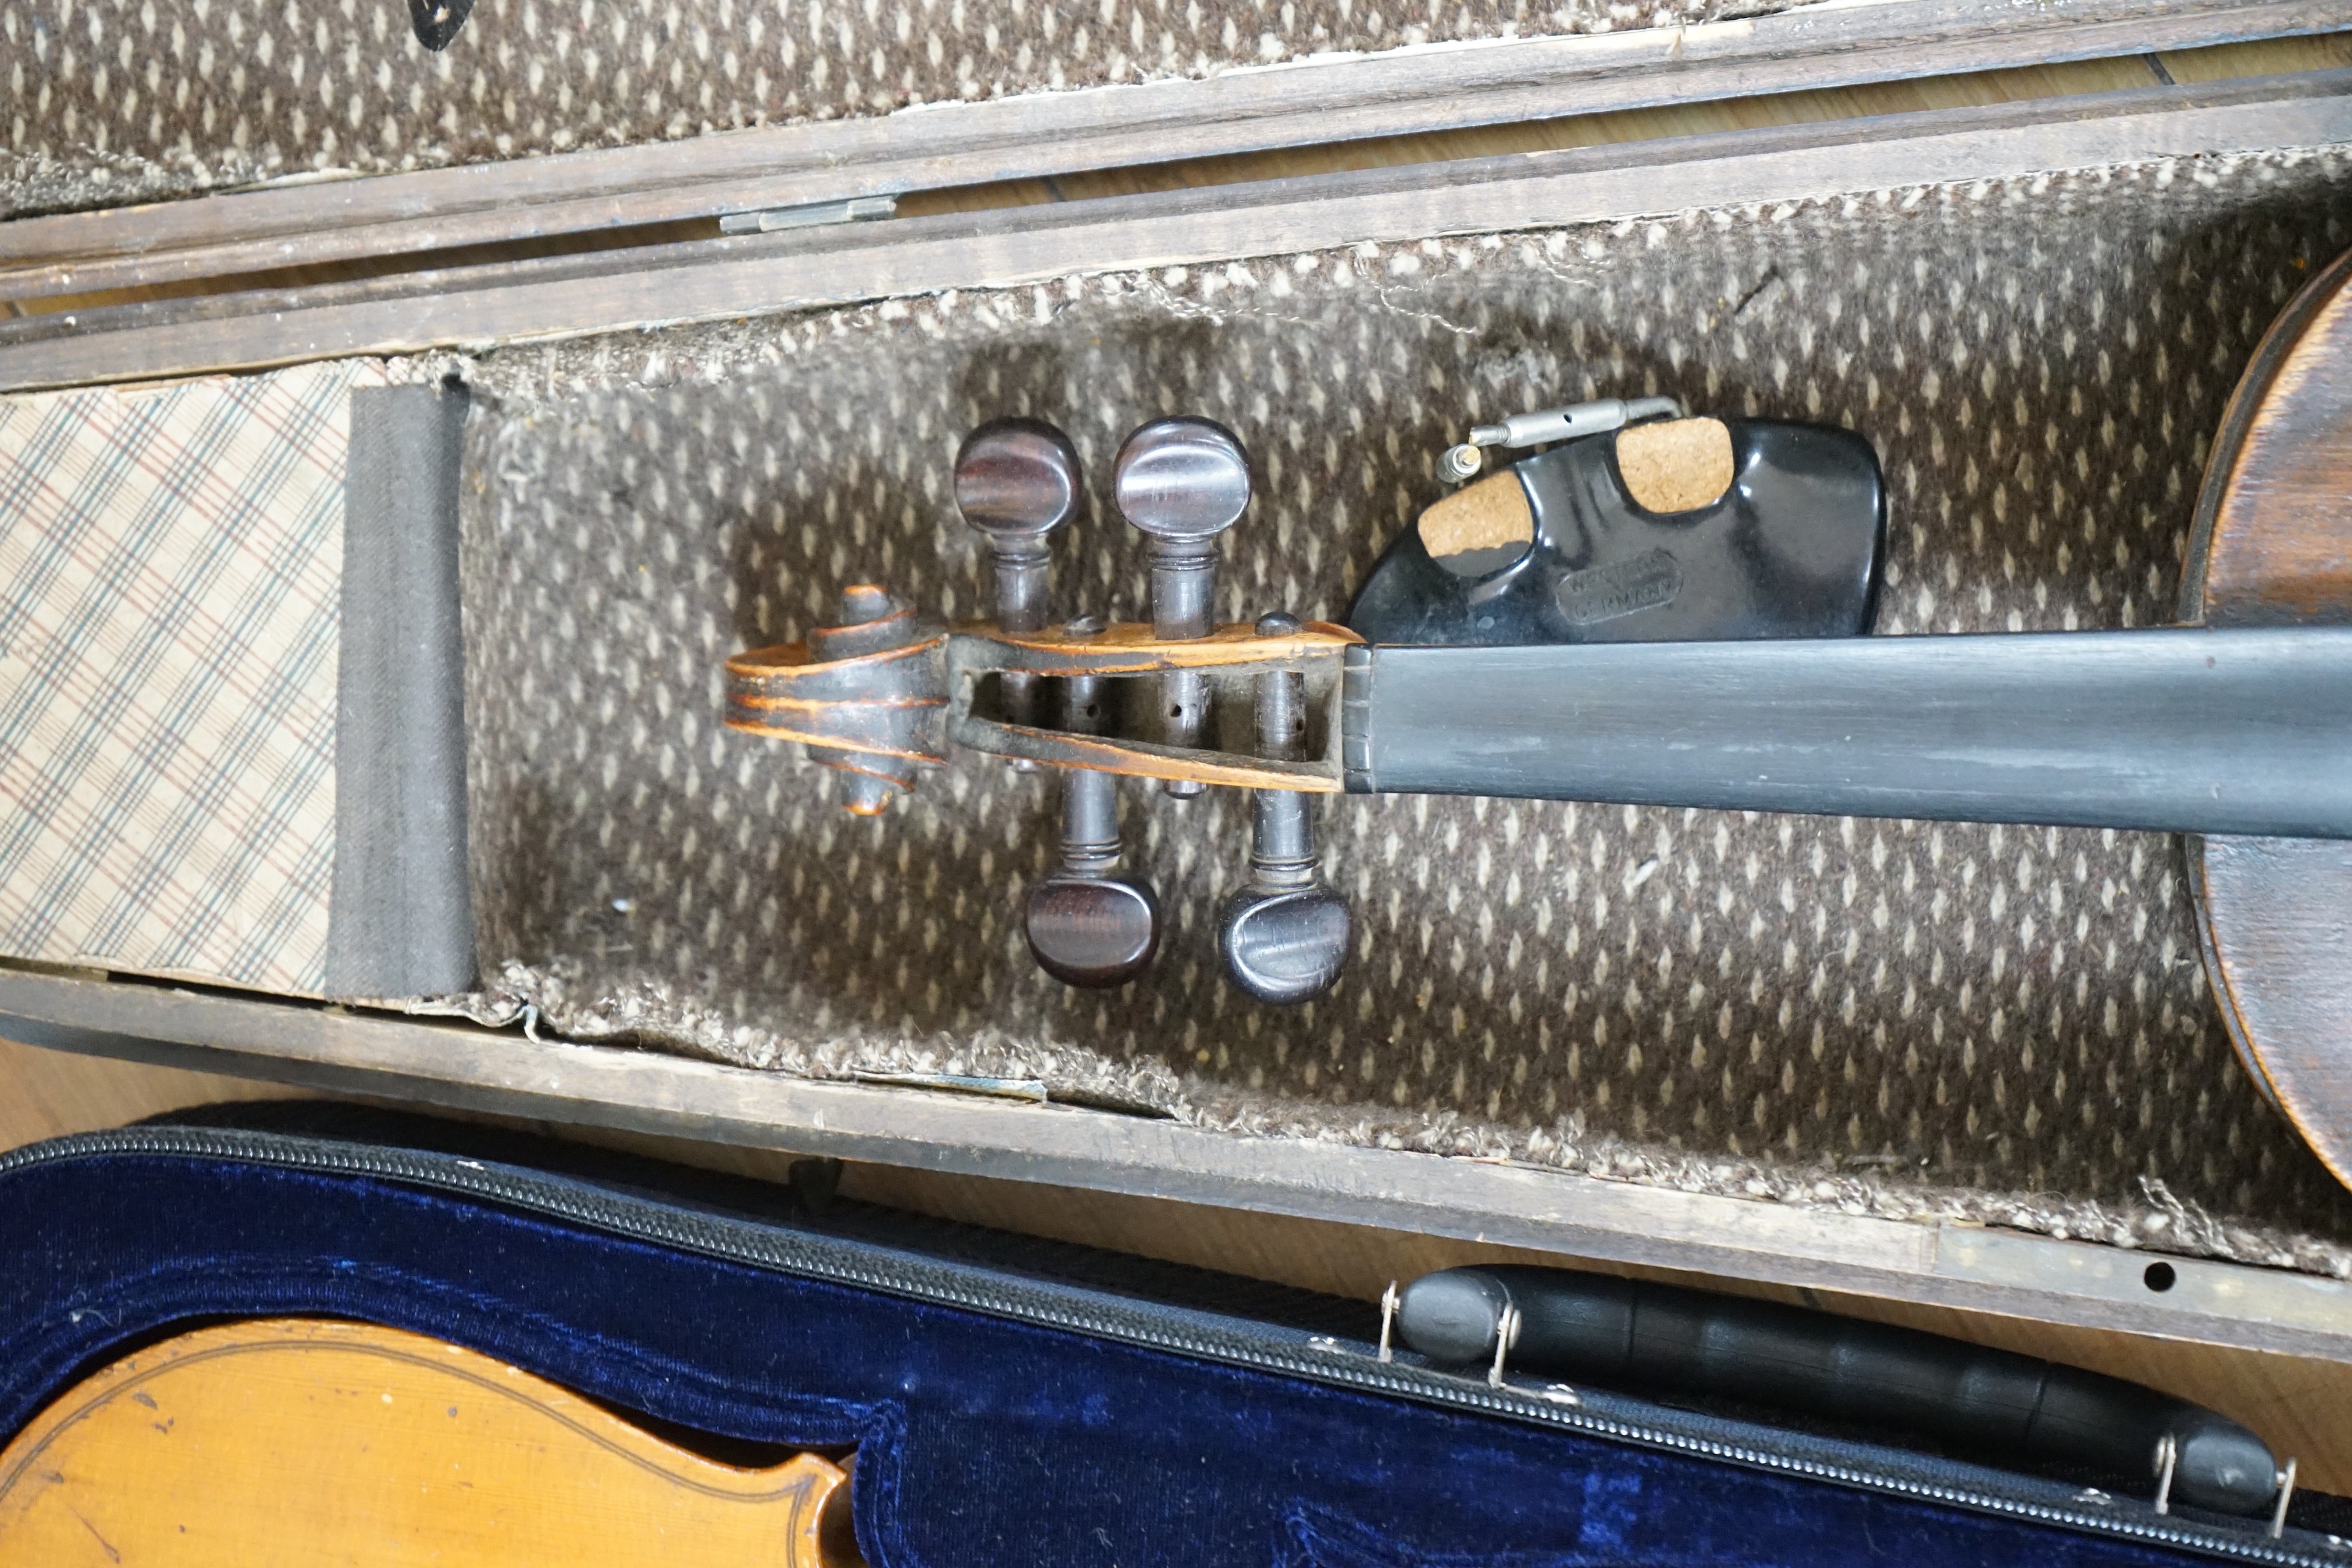 Two cased unnamed violins